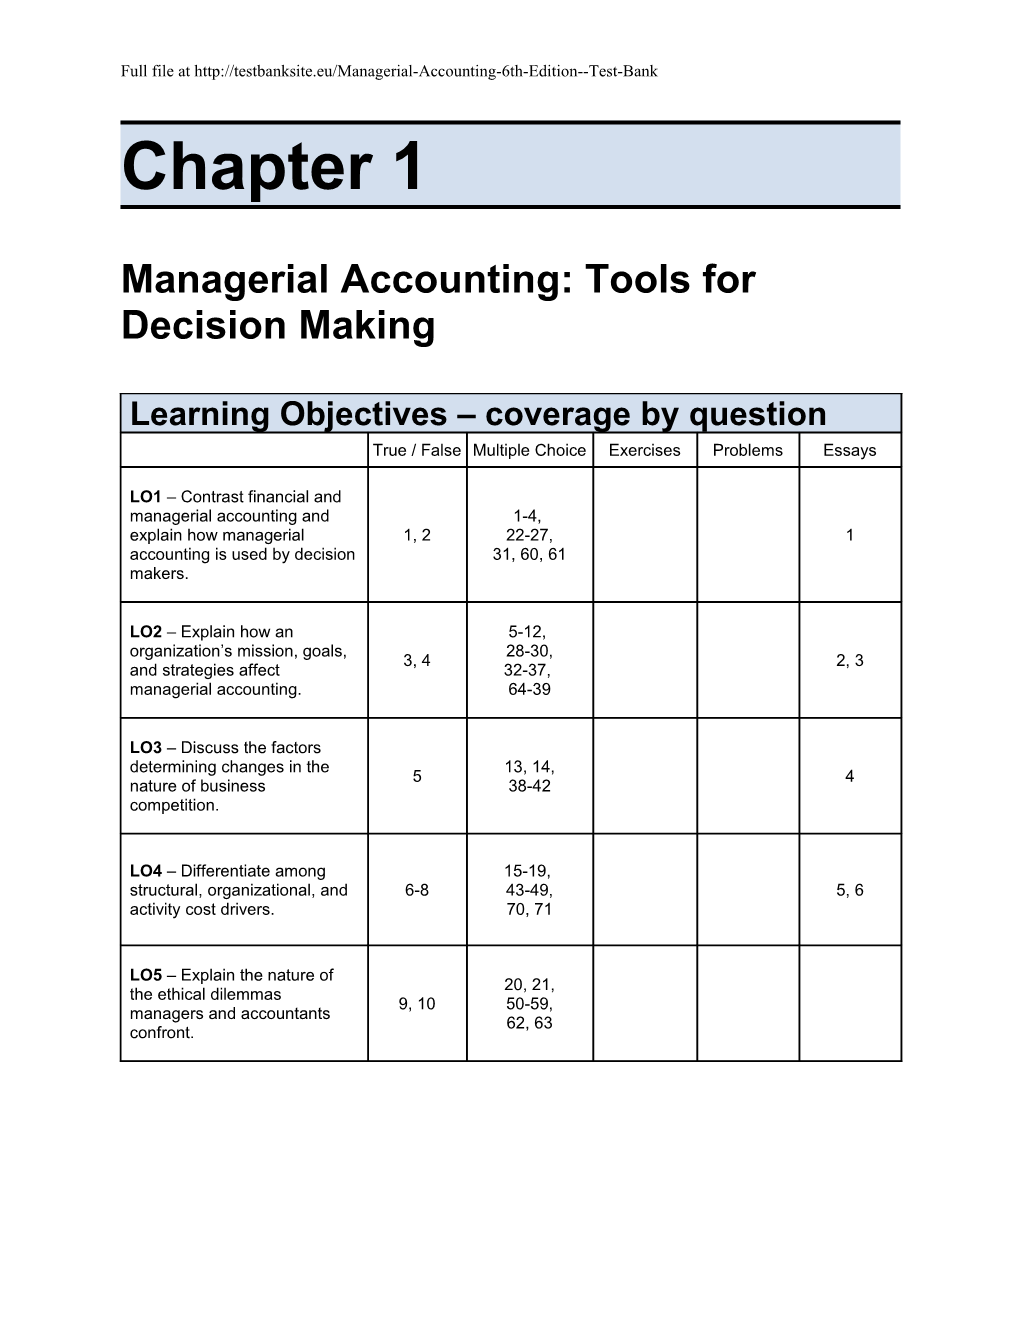 Managerial Accounting: Tools for Decision Making